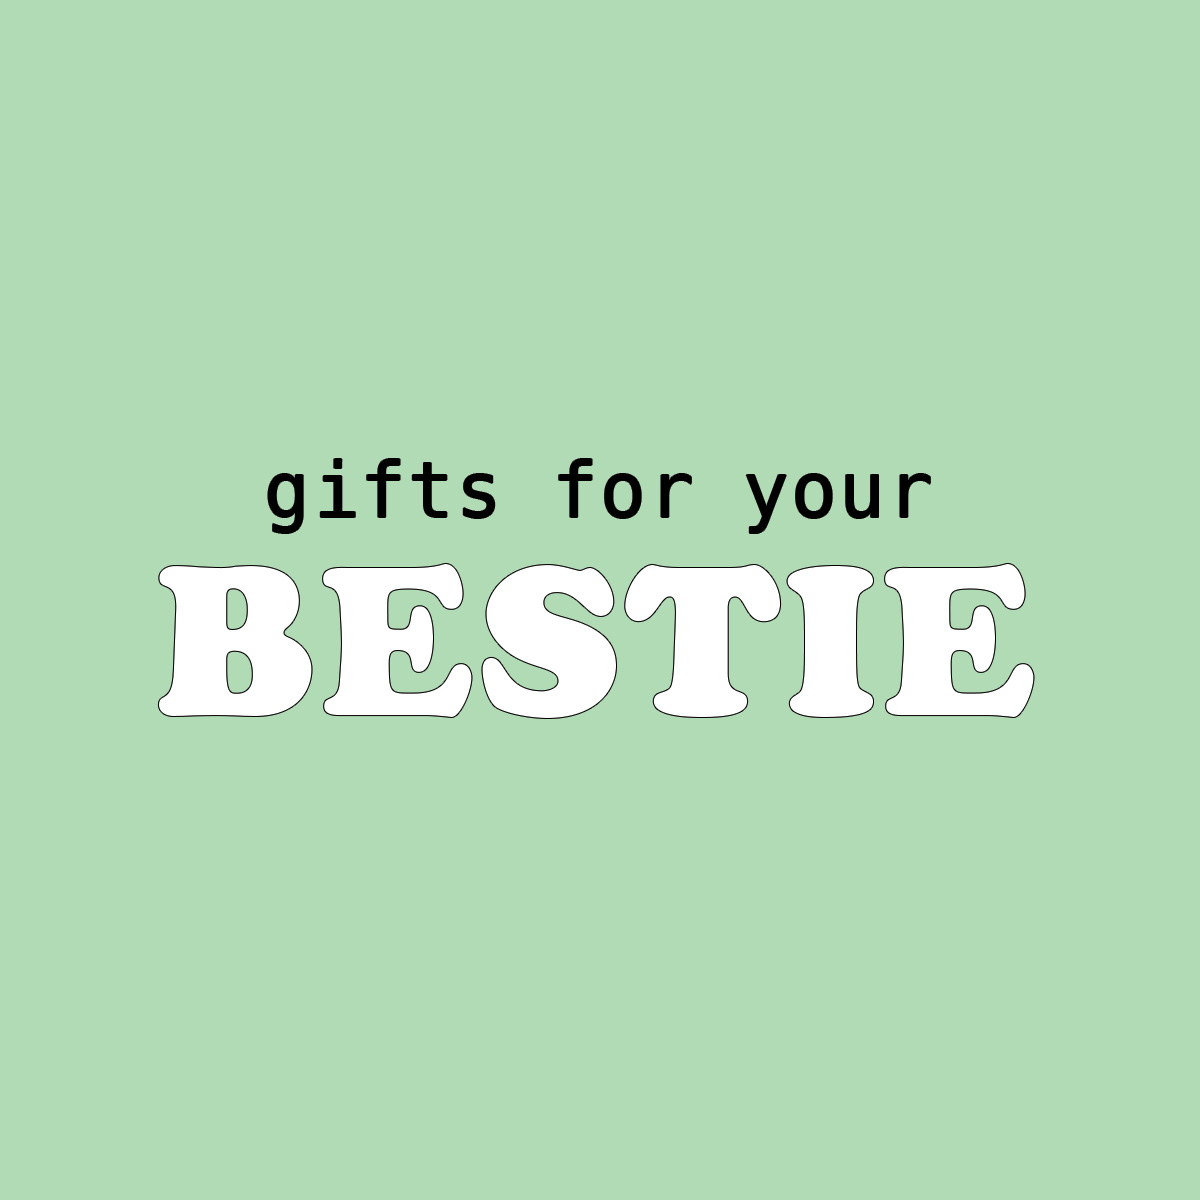 Gifts for Your Bestie